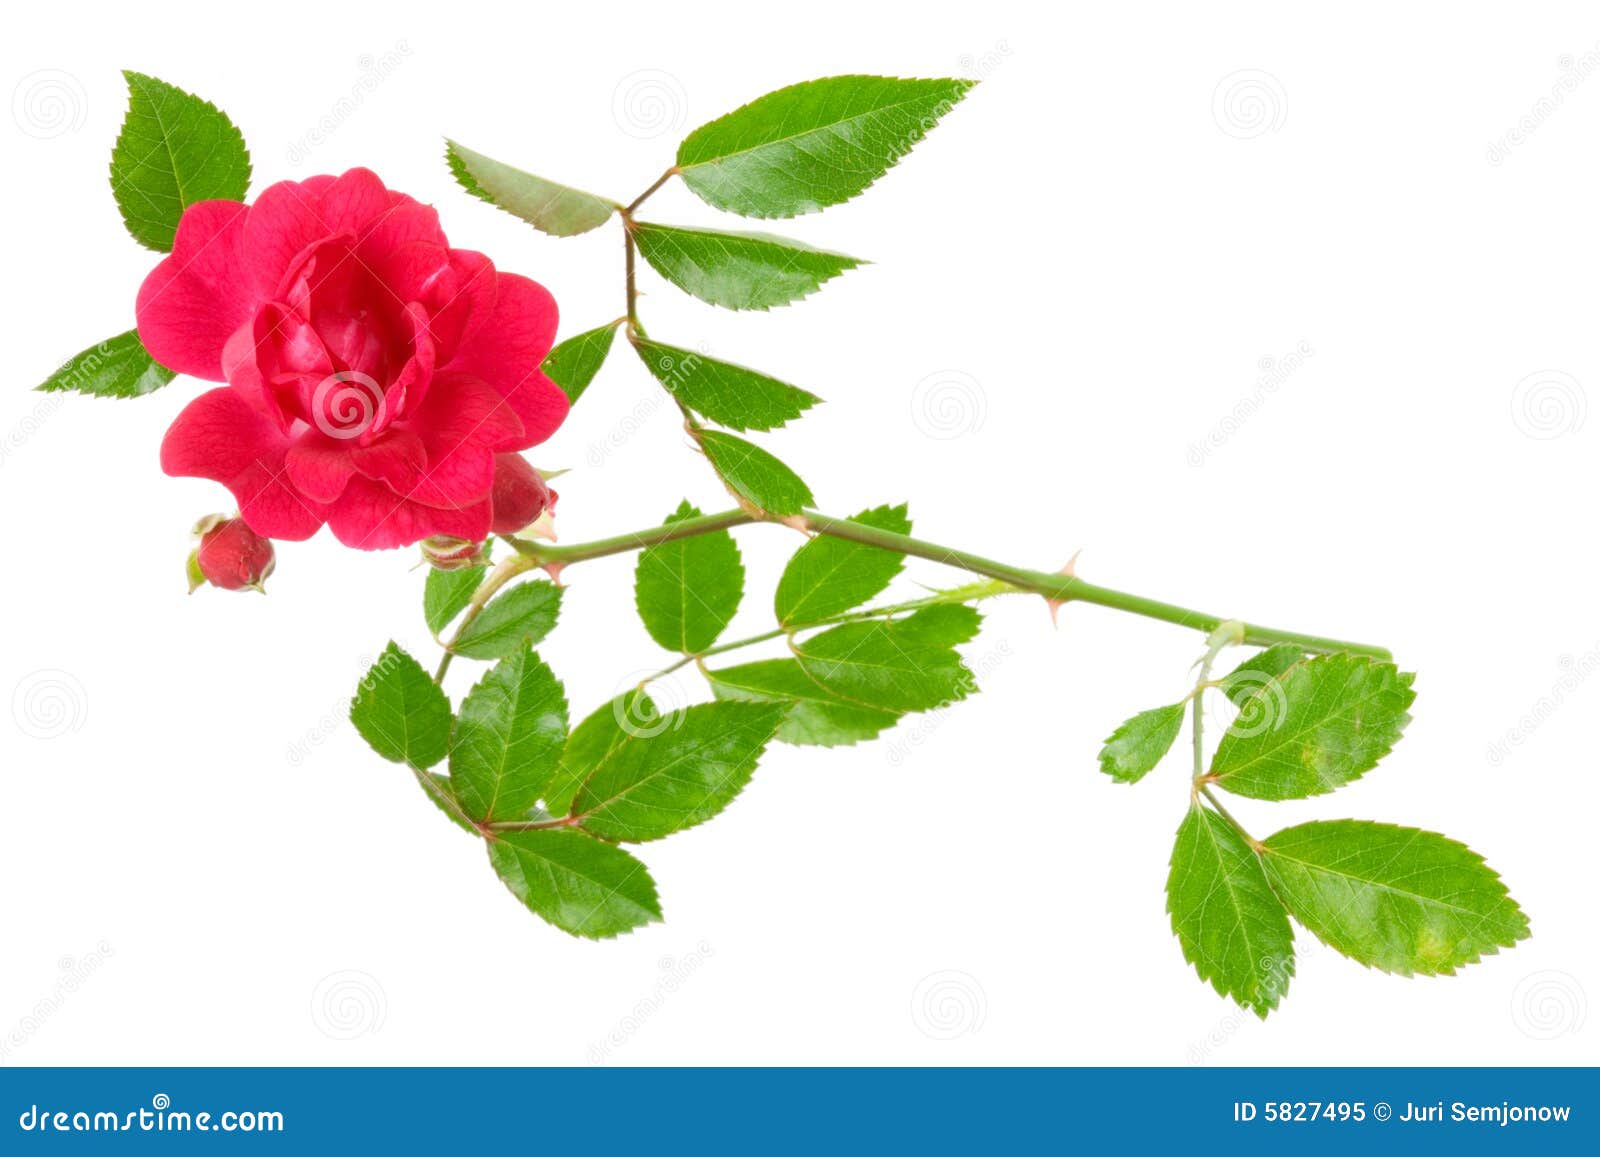 Red rose with leafs. stock image. Image of love, blossom - 5827495